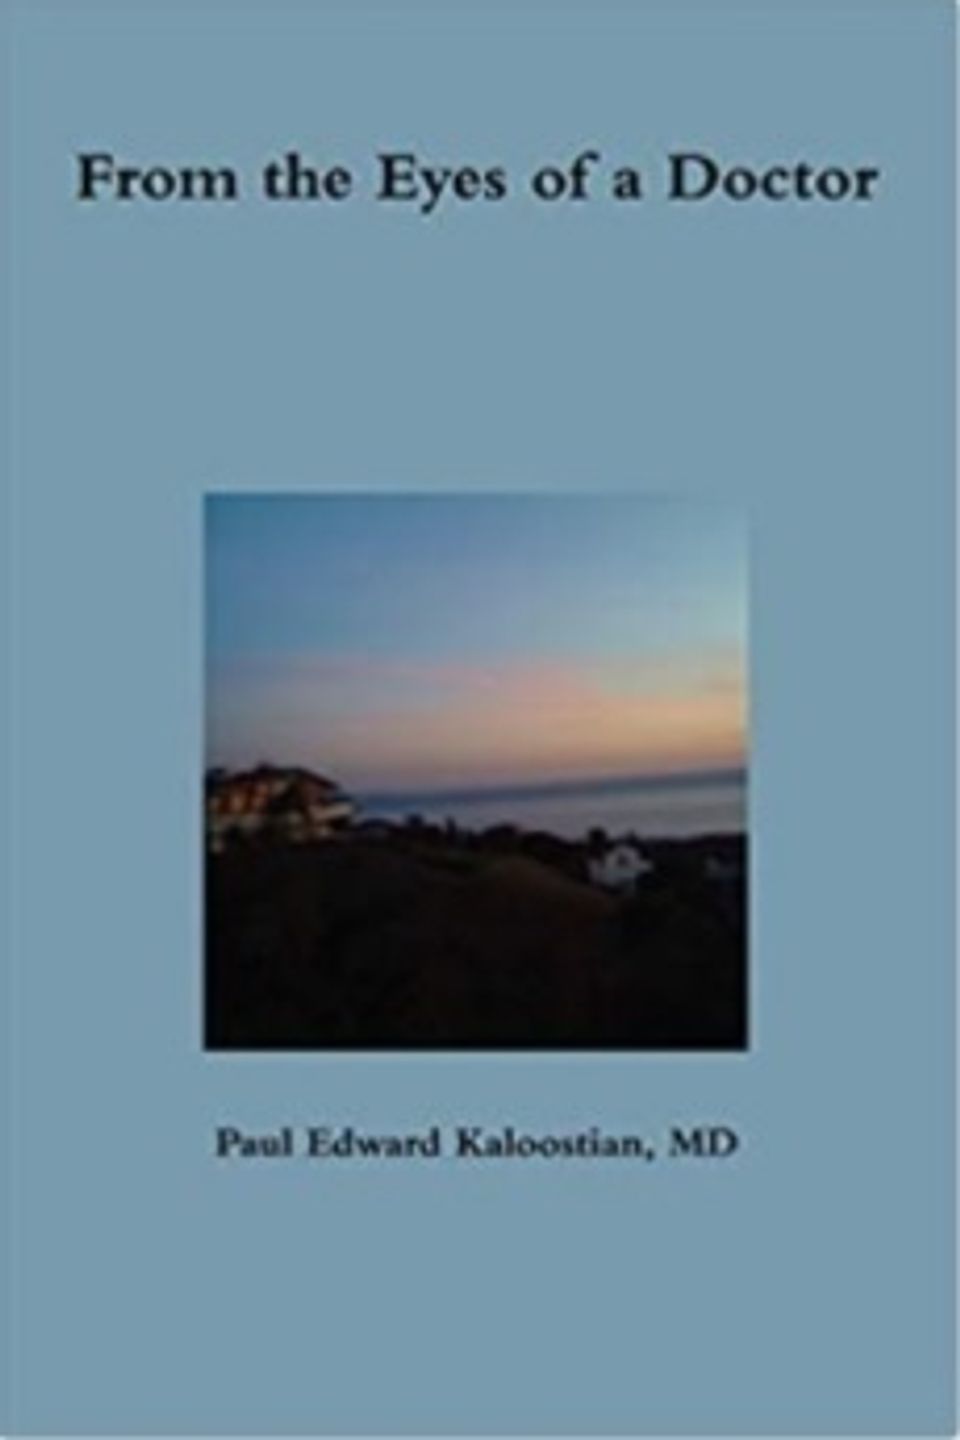 From the eyes of a doctor by paul e kaloostian